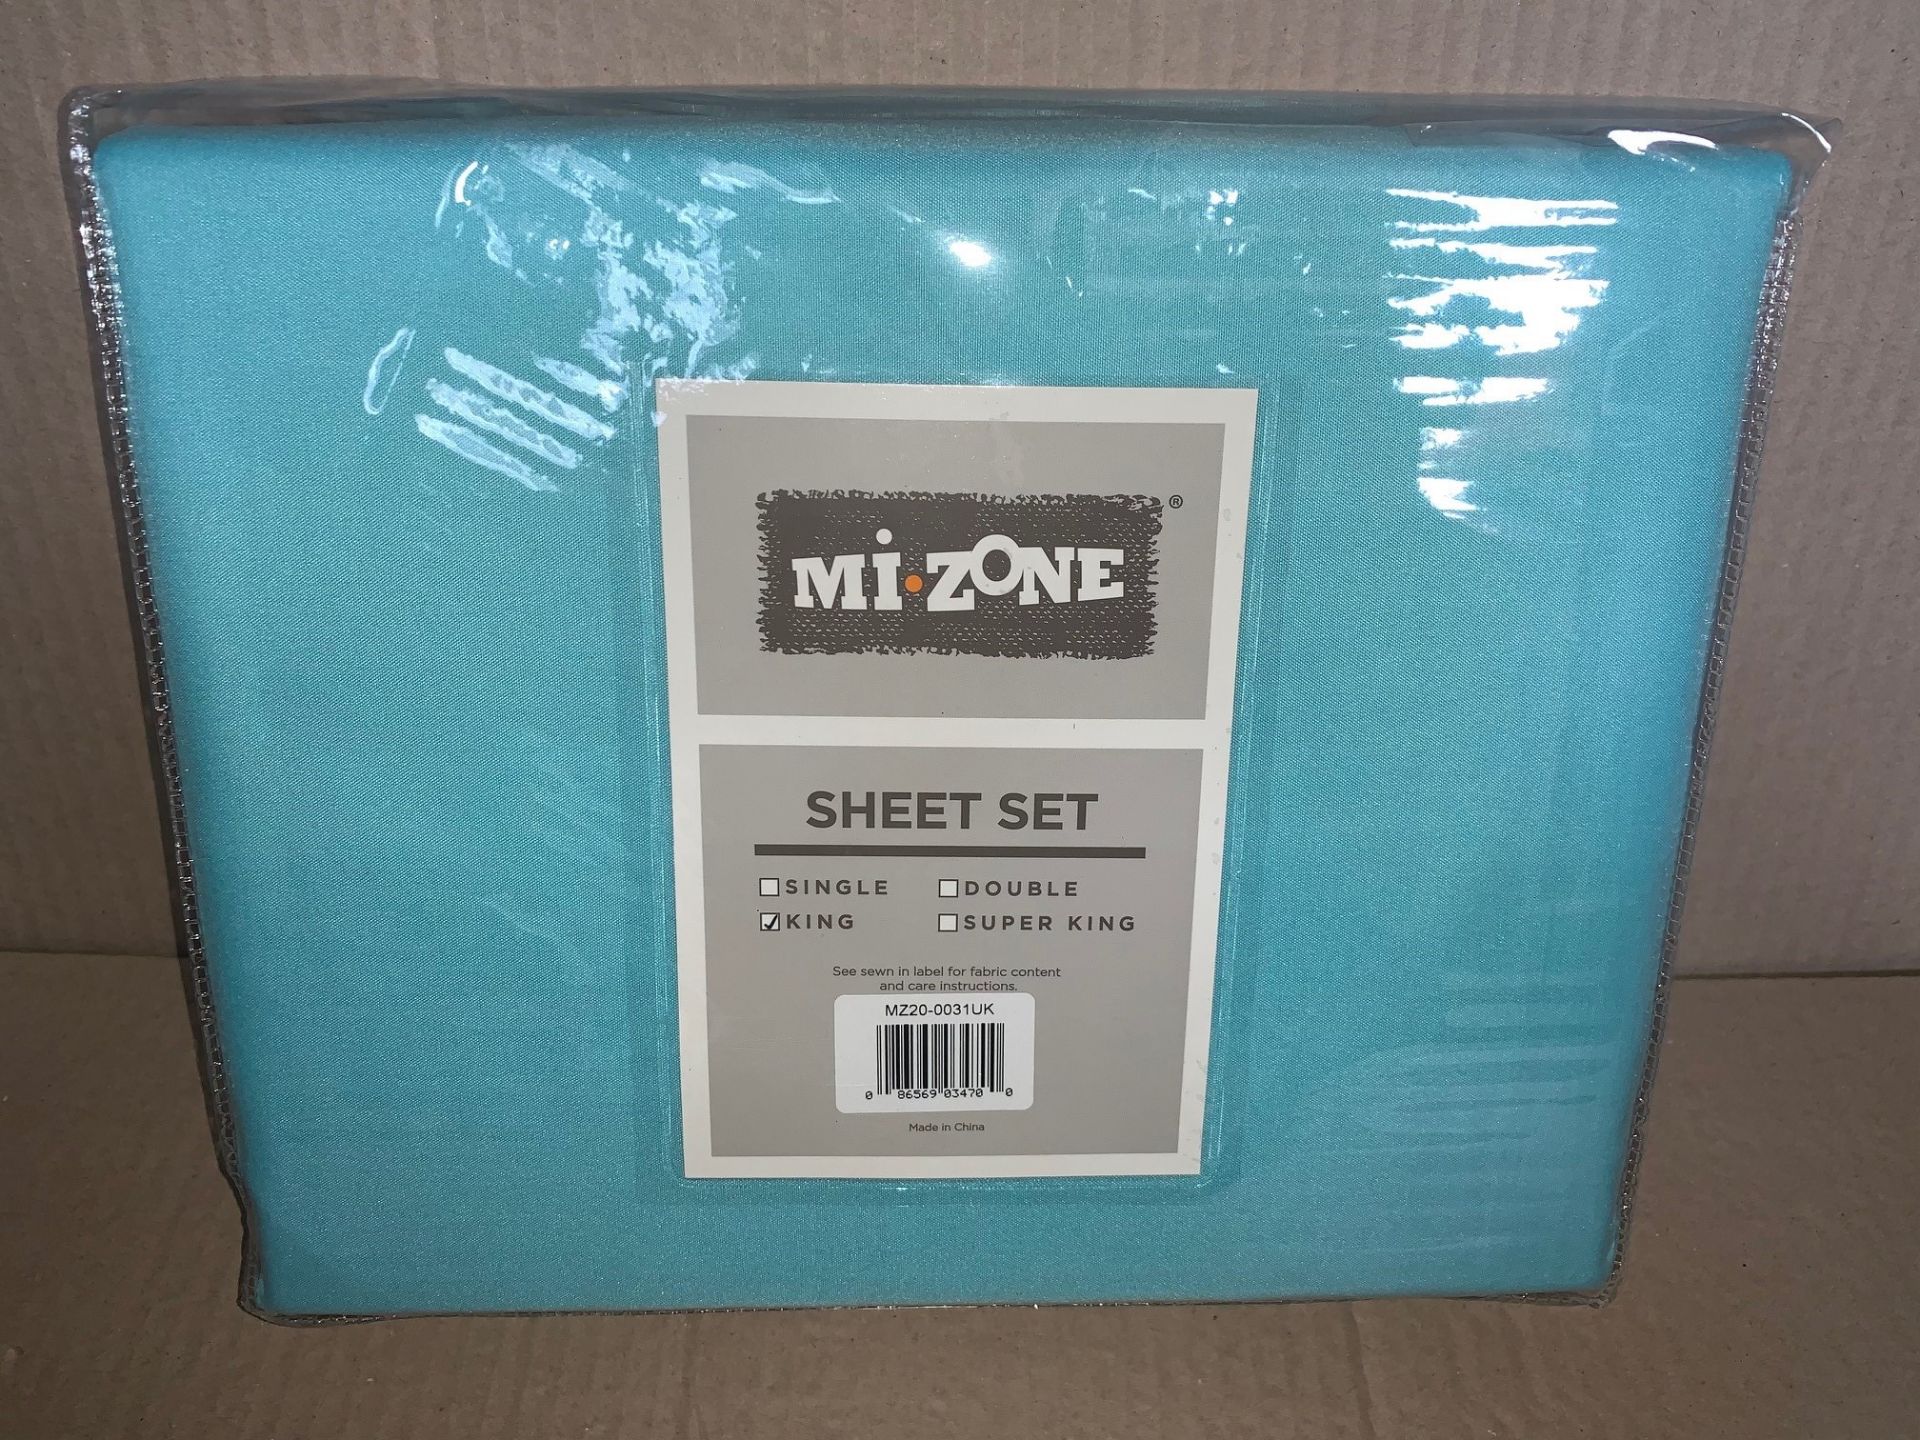 3 x Mi-Zone King Size Sheet Sets Teal - Includes Fitted Sheet, Flat Sheet and Pillowcases -